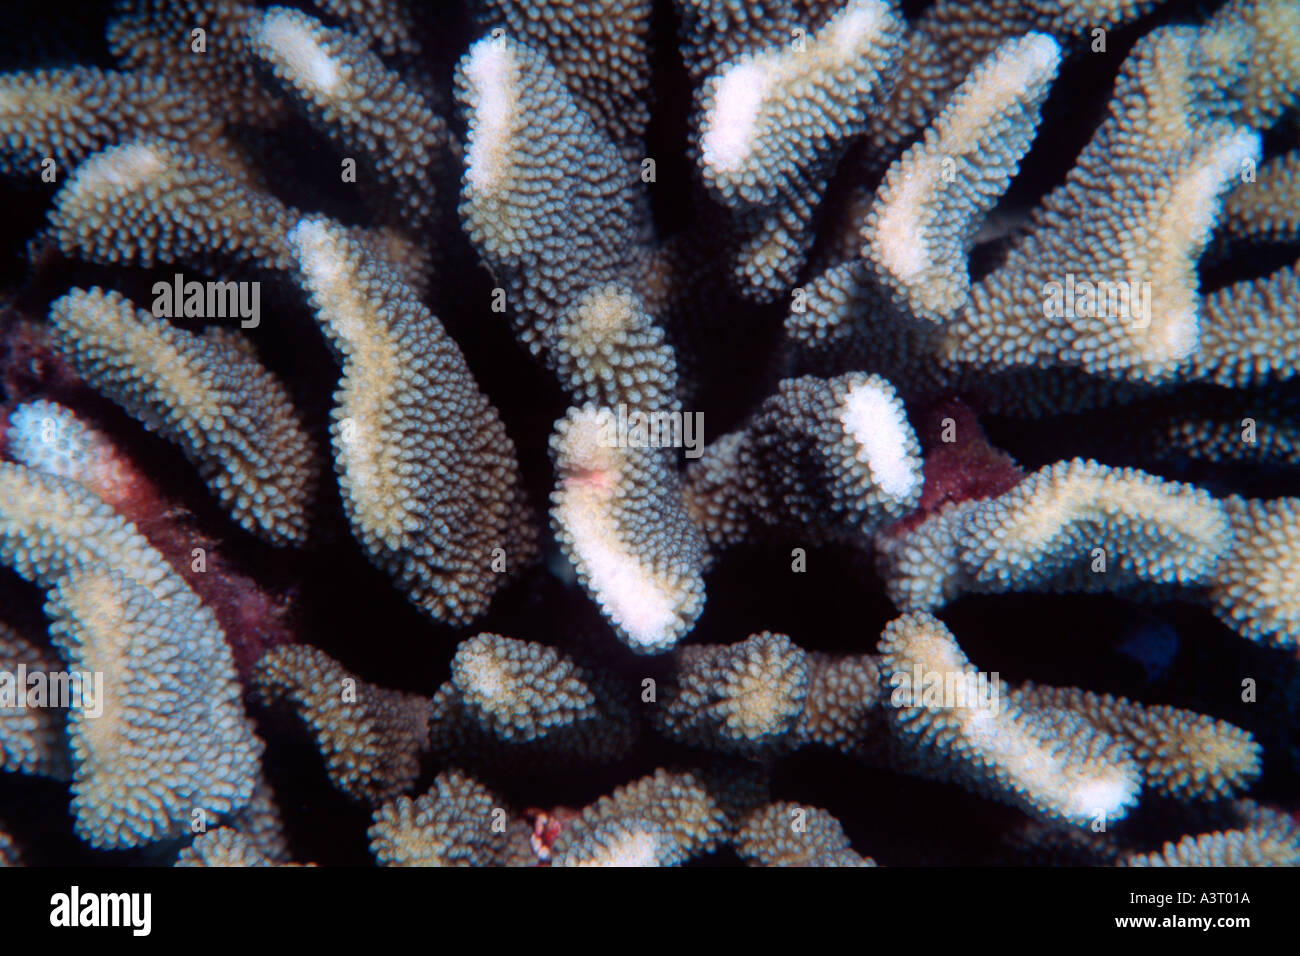 Pocillopora coral Rongelap Atoll Marshall Islands North Pacific Stock Photo